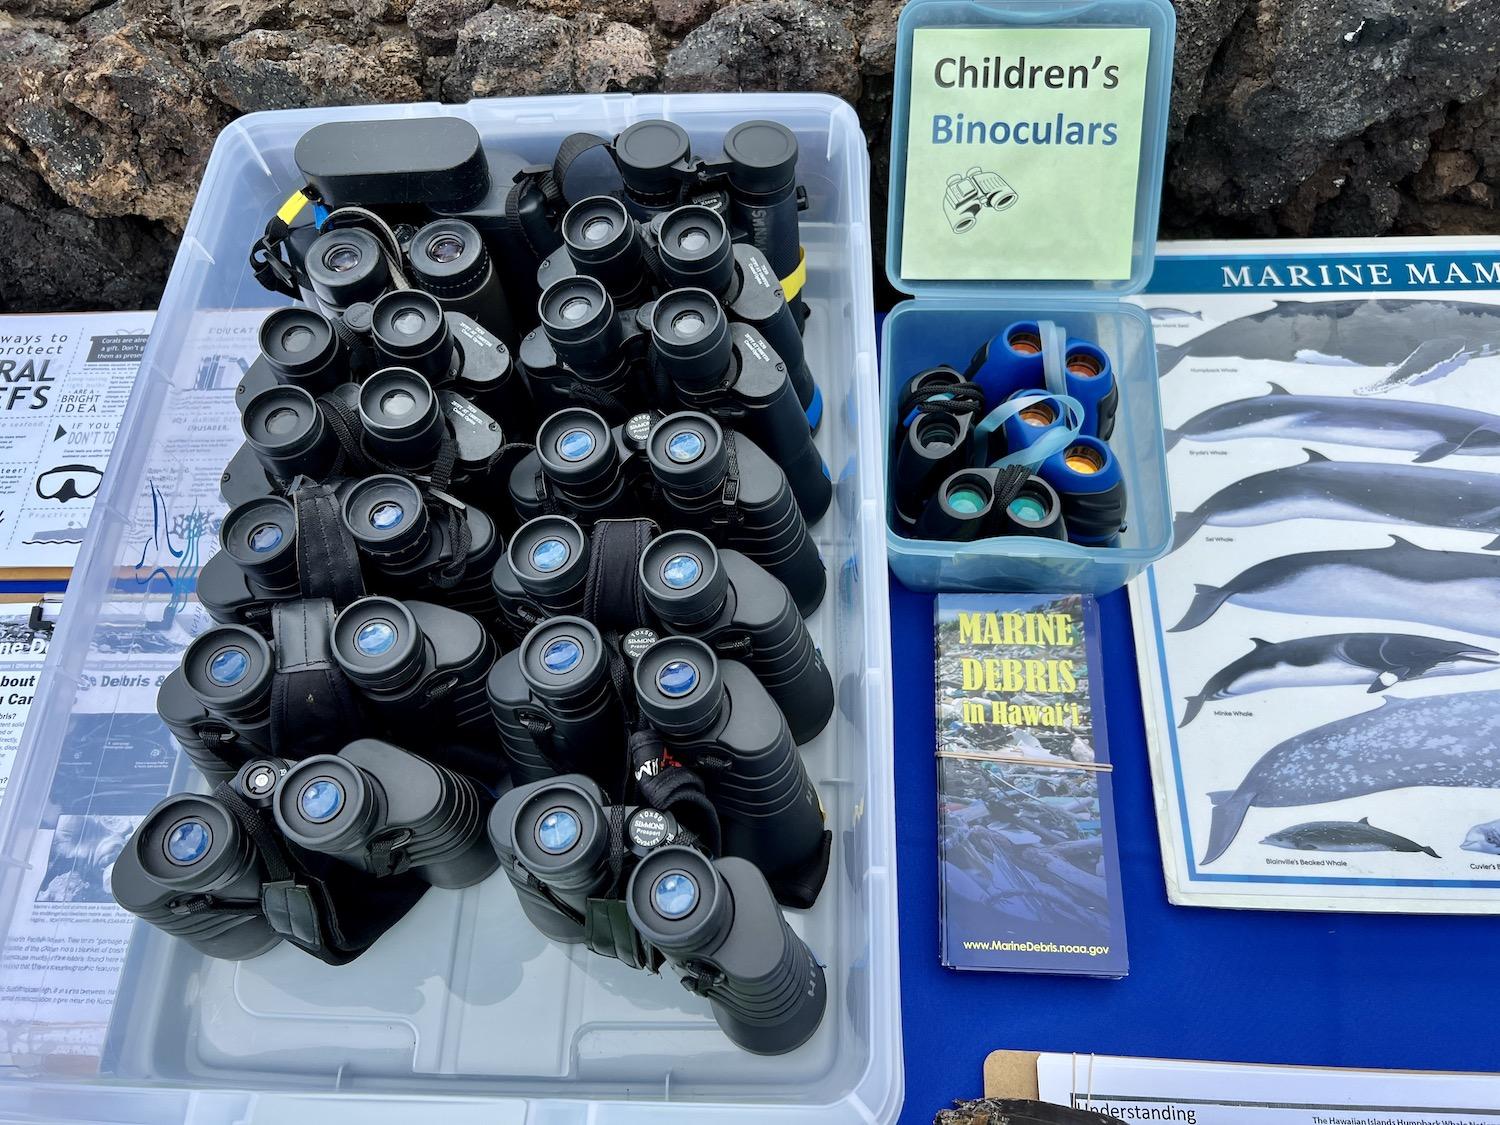 Park visitors can borrow binoculars from Hawaiian Islands Humpback Whale National Marine Sanctuary volunteers during whale-watching season on Tuesdays from January to March.